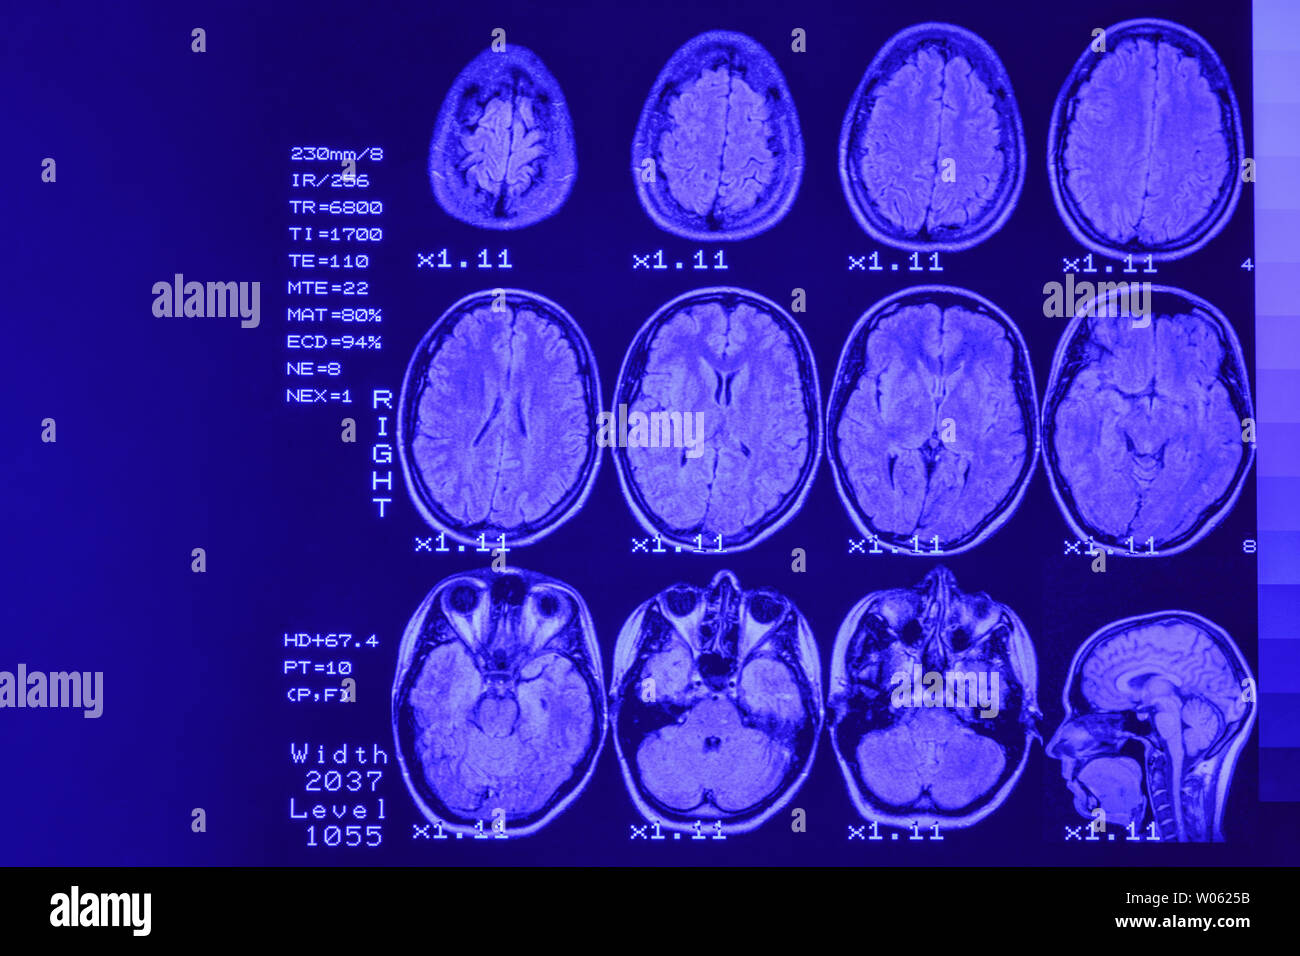 Full body scan, MRI scan - Stock Image - P835/0068 - Science Photo Library